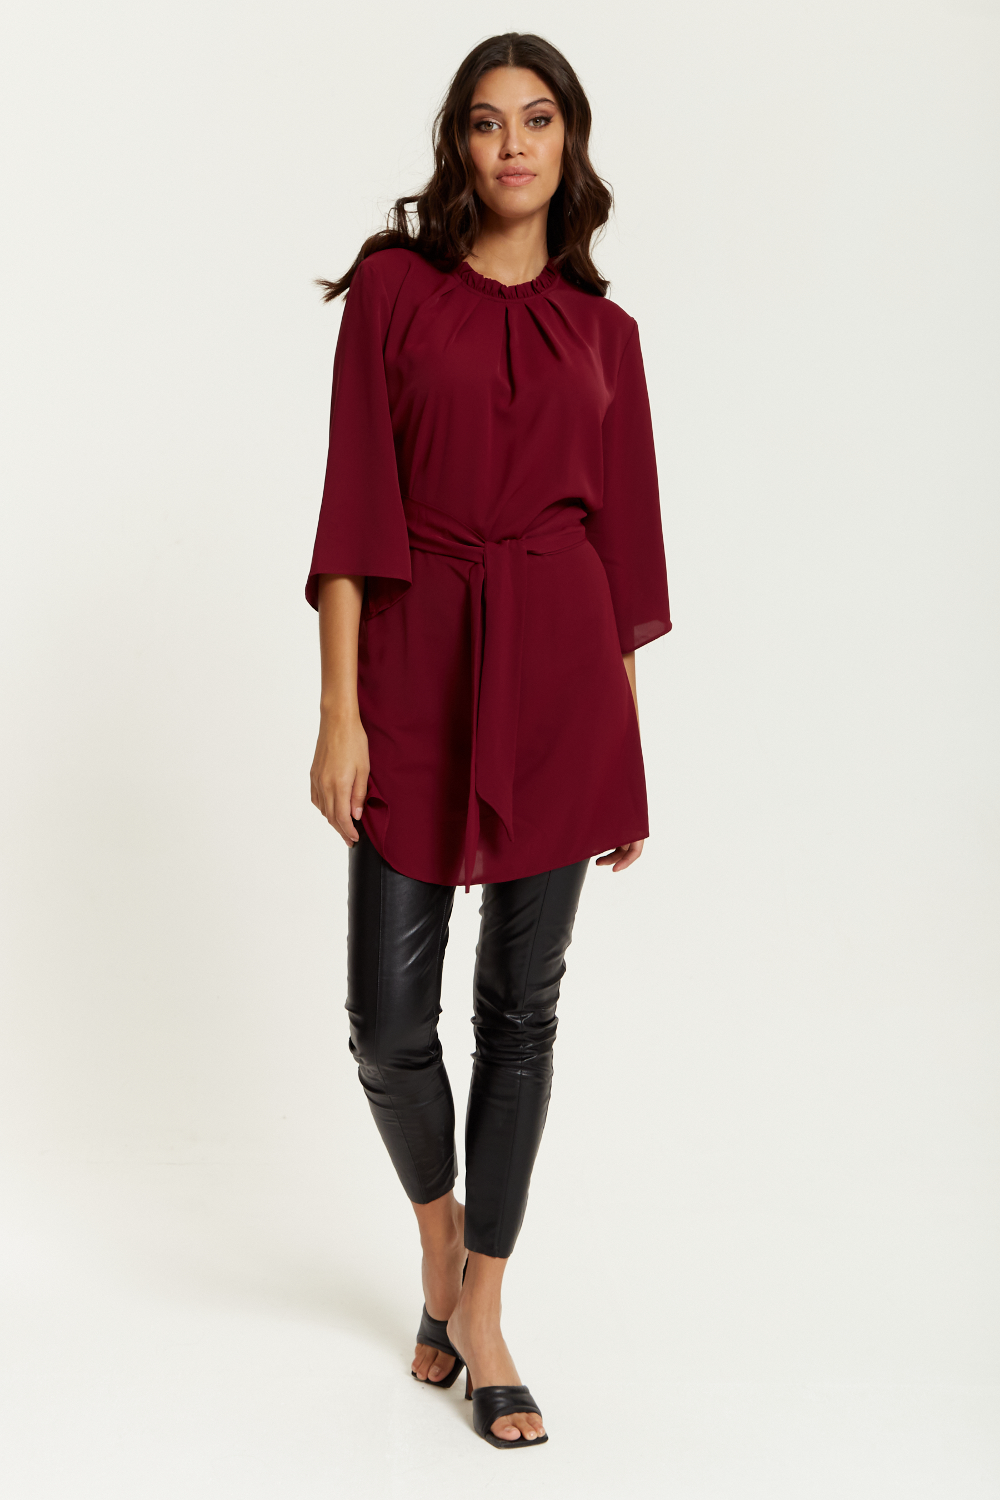 Tie Waisted Ruffle Neck Tunic with 3/4 Sleeves in Burgundy GLR FASHION NETWORKING